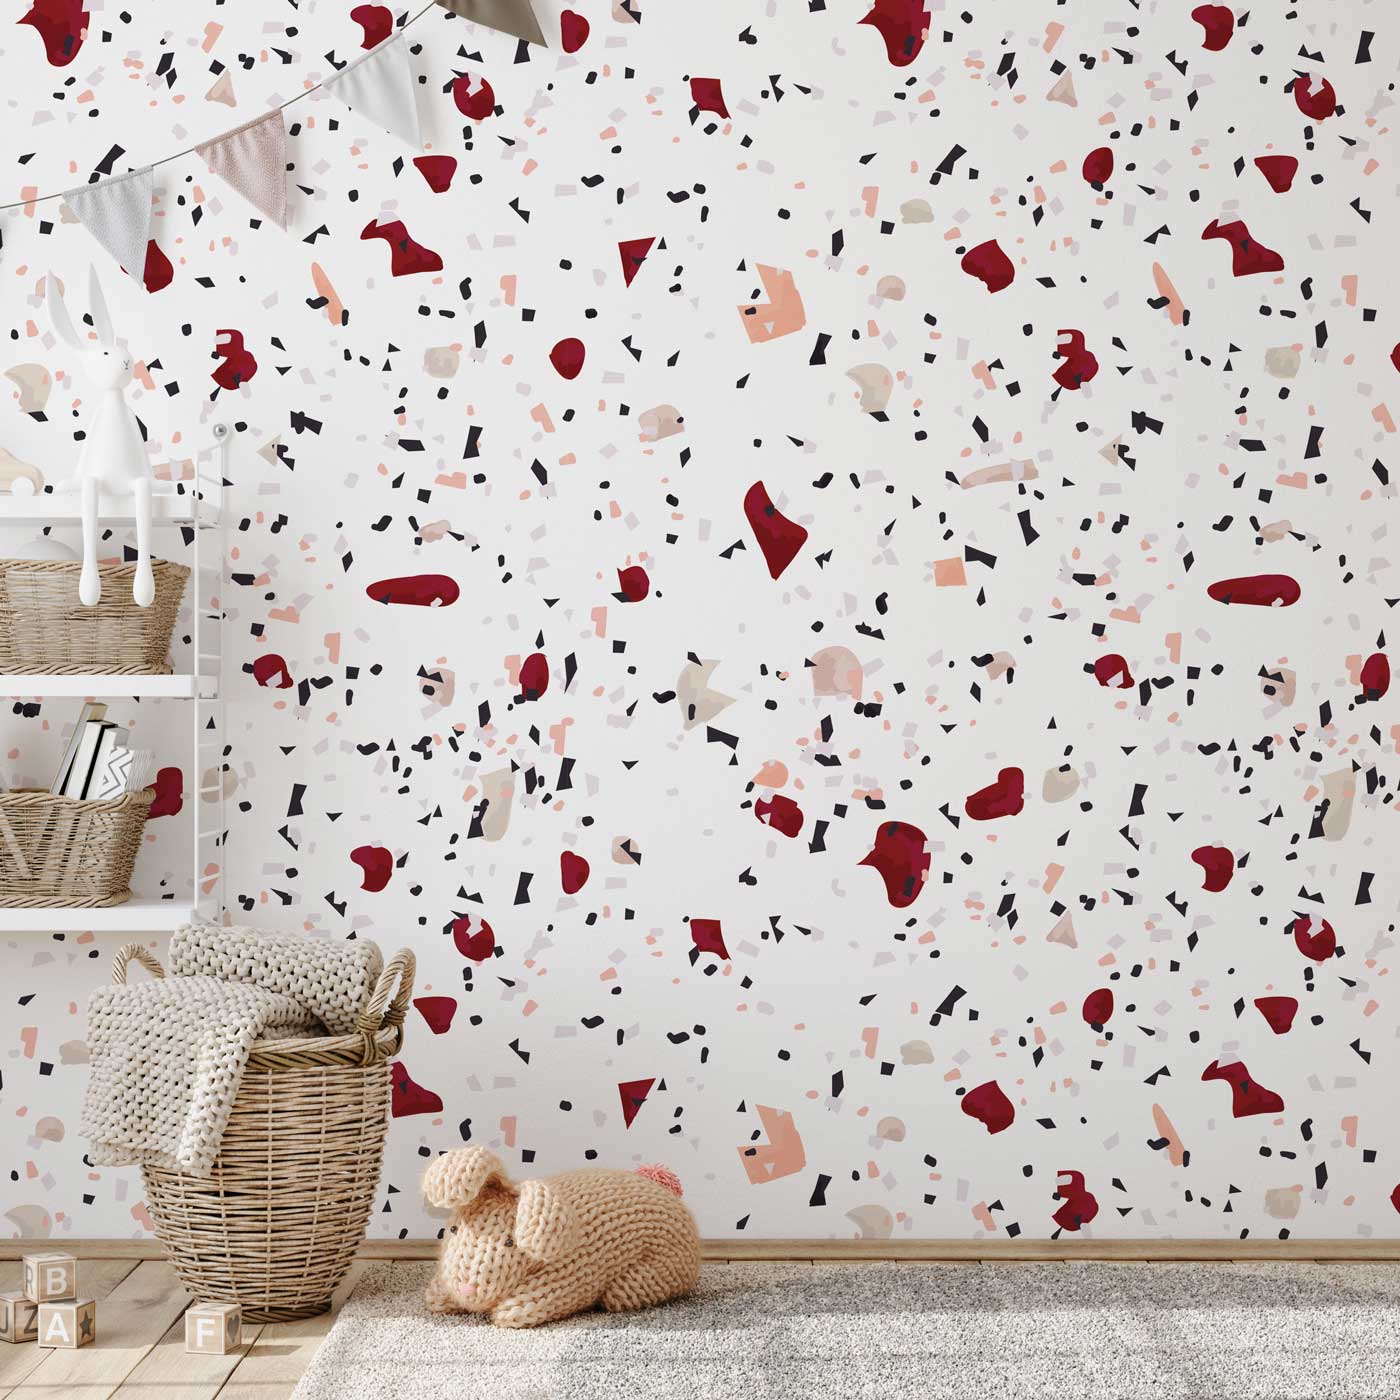 Wallpaper mural with a mixed chip and marble pattern for the hallway's decoration.